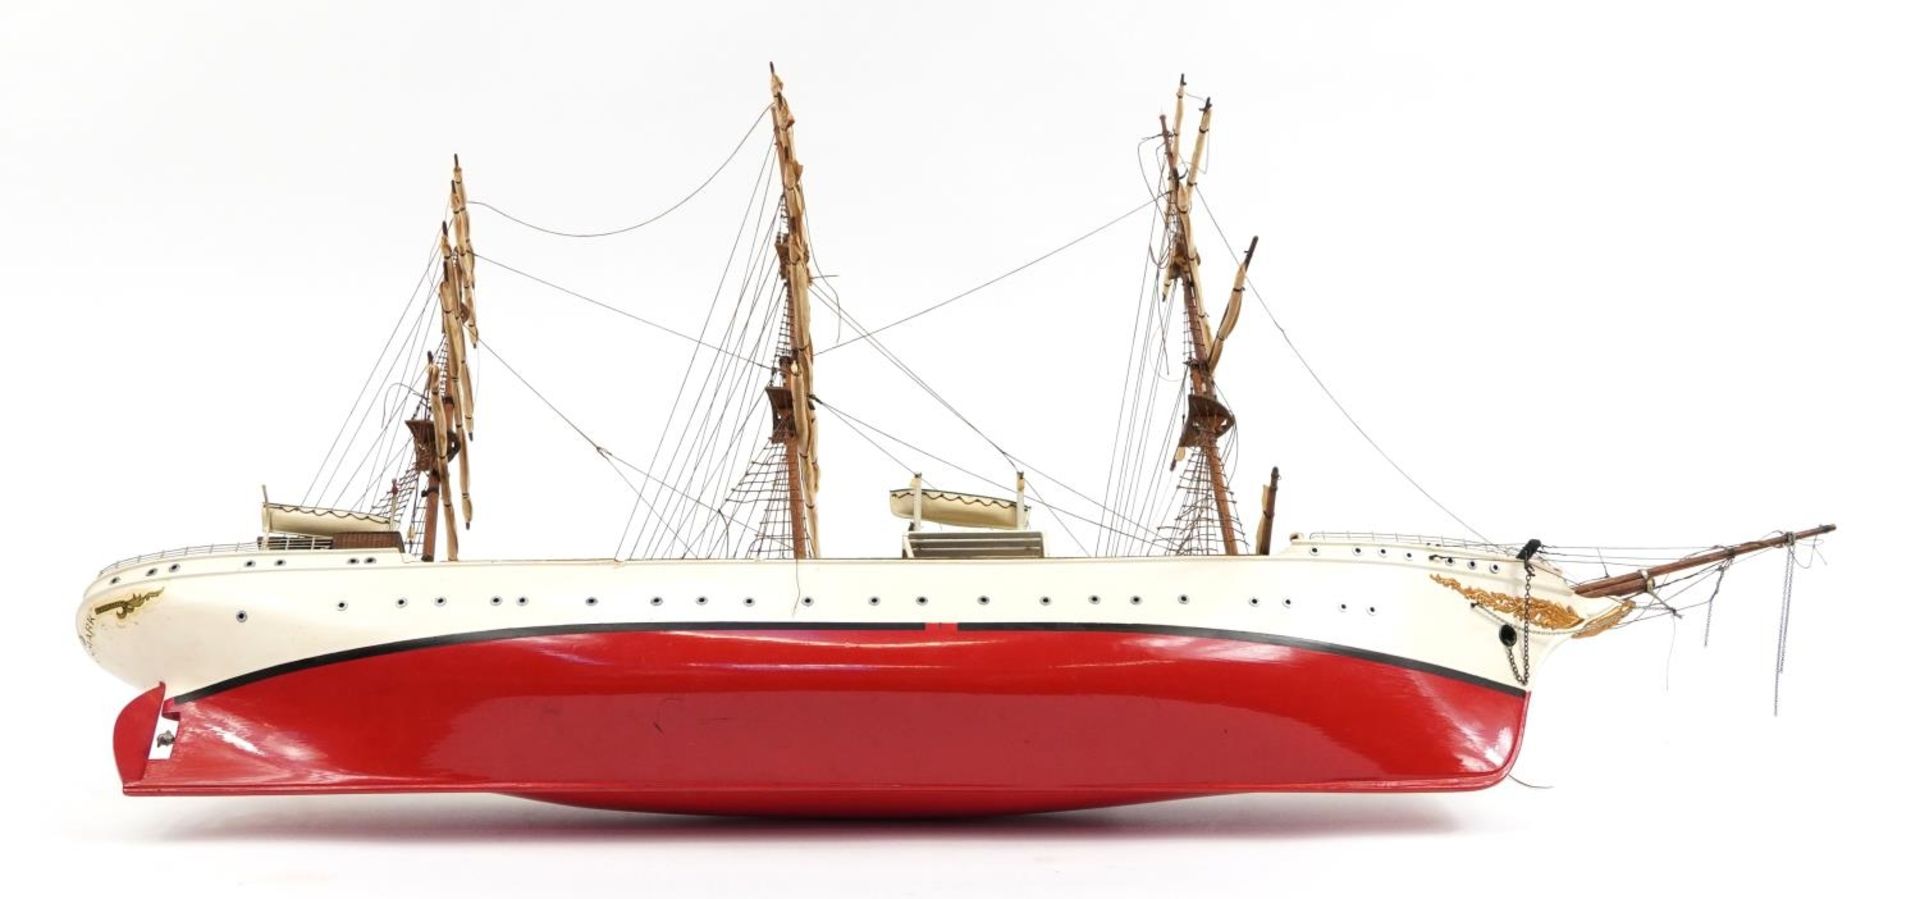 Danmark scratch built model of a rigged cutter on stand, 100cm in length - Image 4 of 4